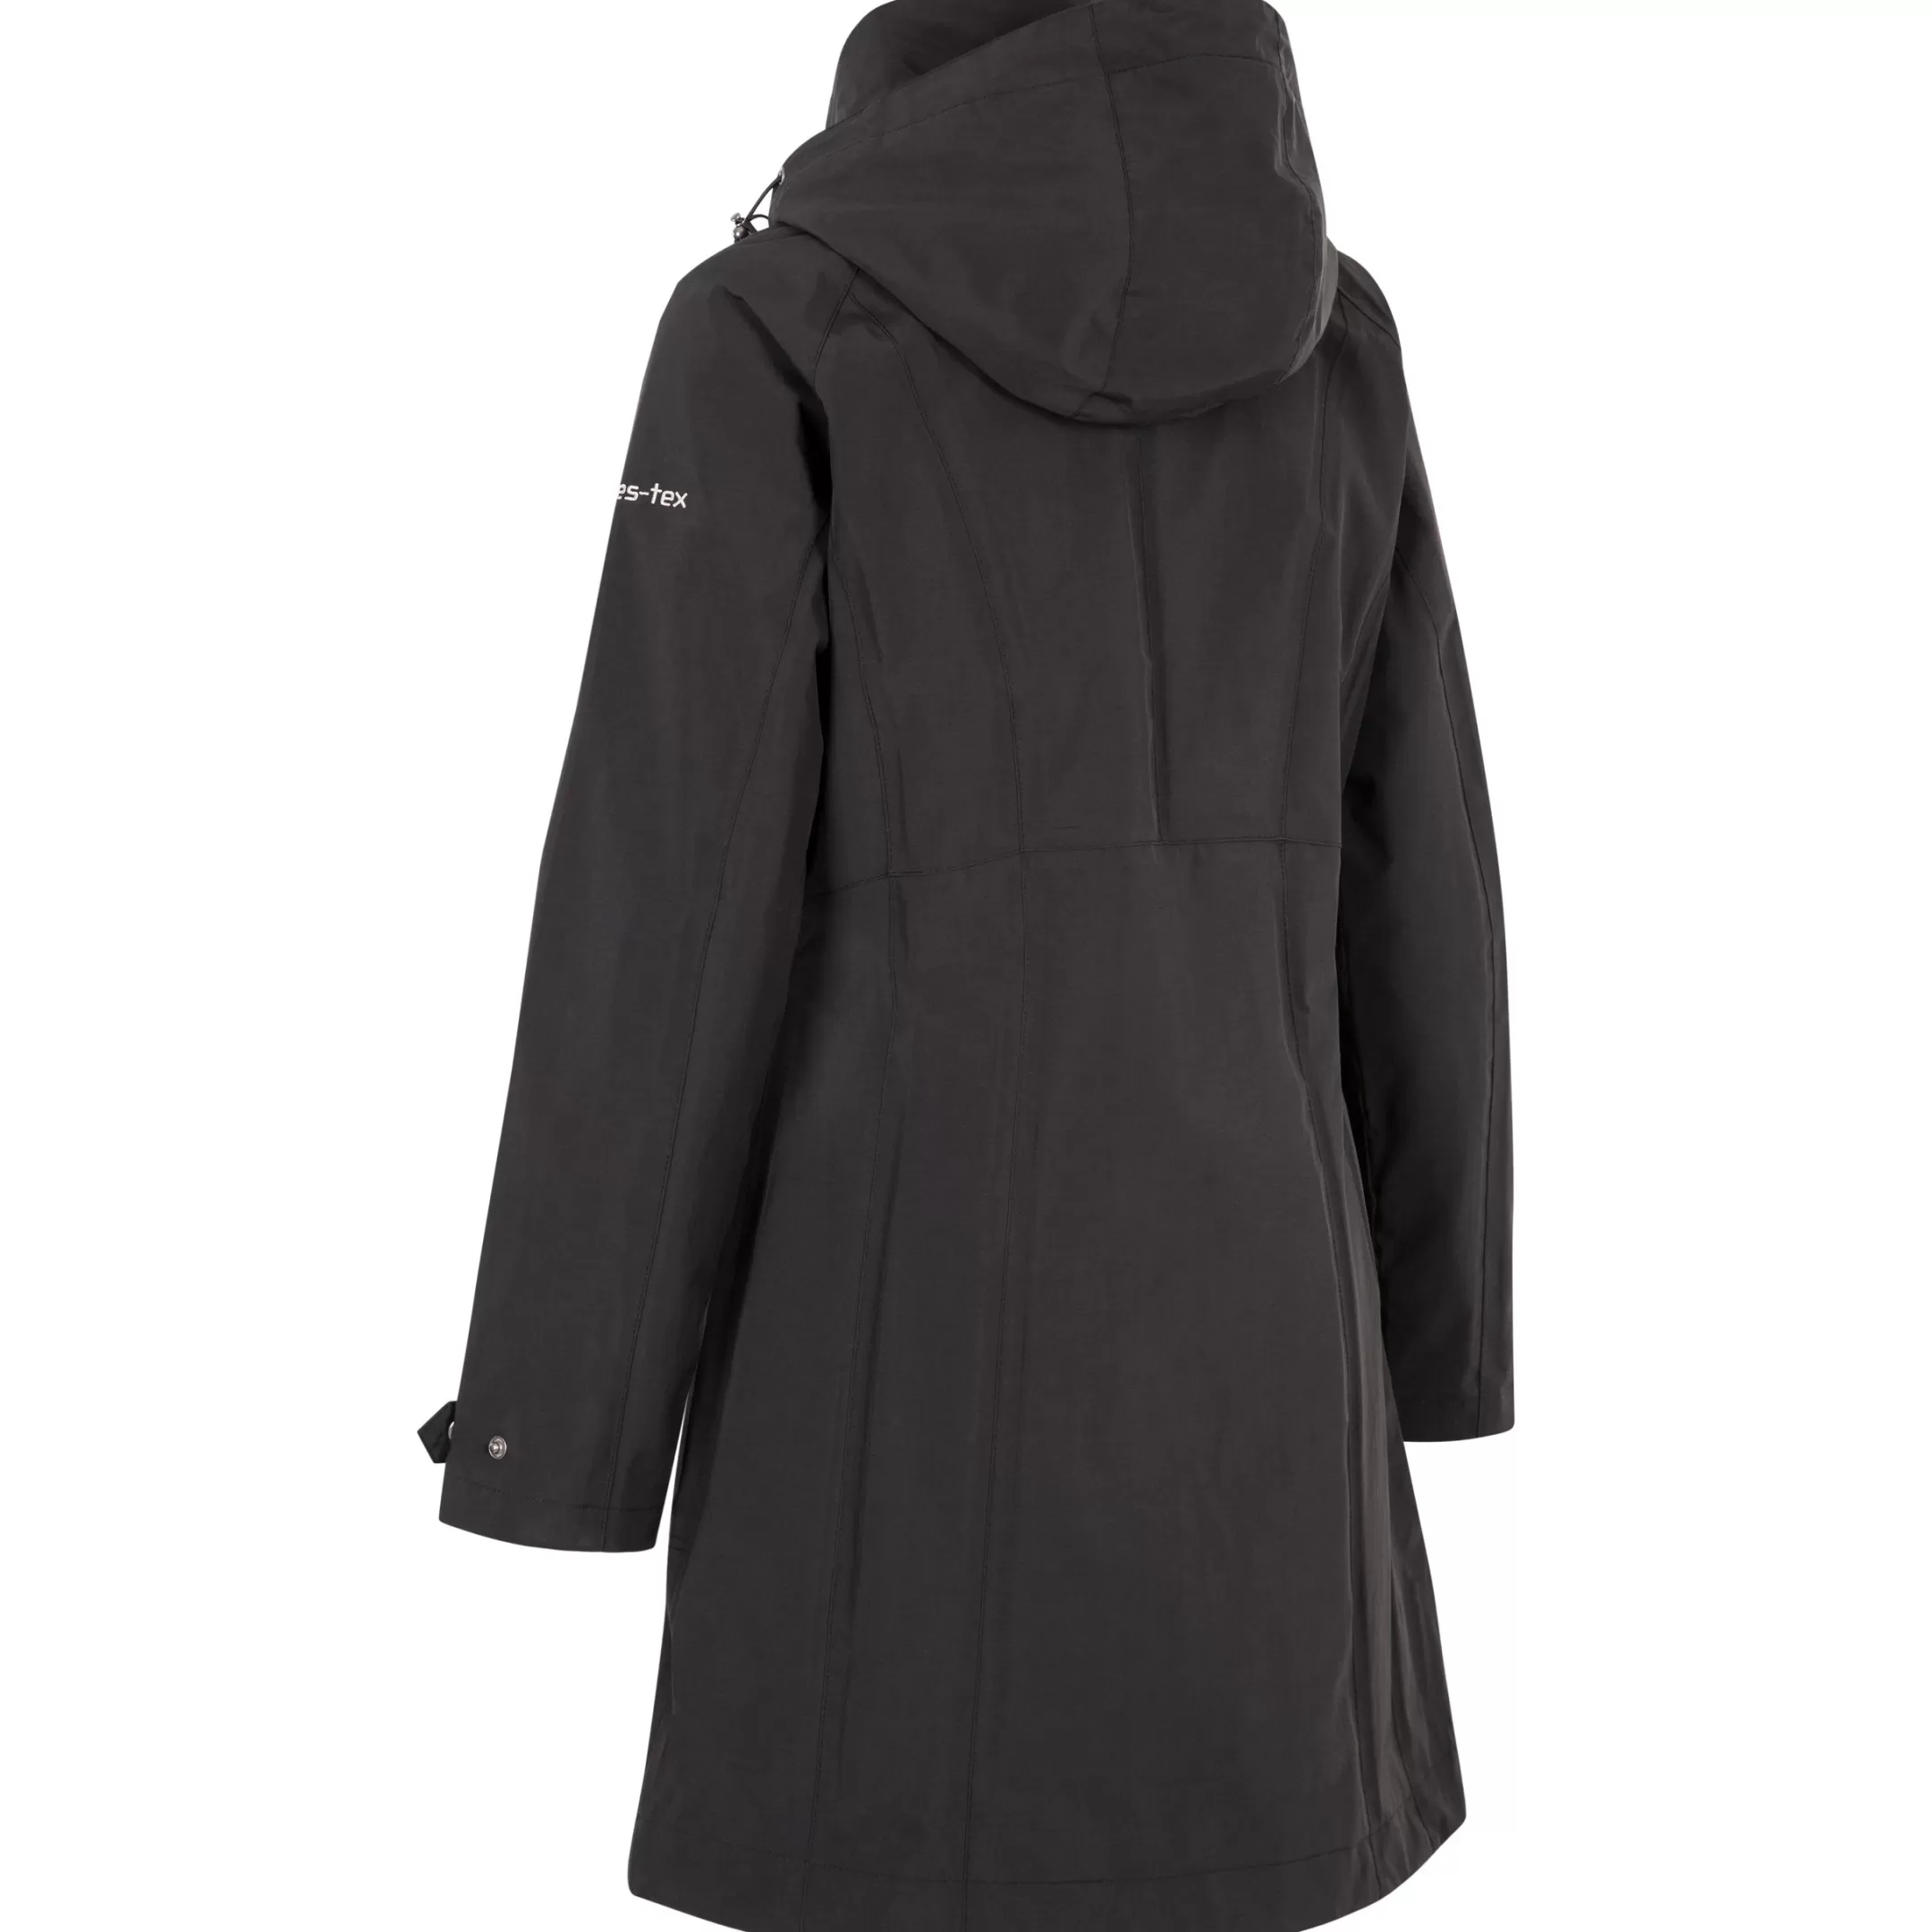 Womens Waterproof Jacket Rainy Day | Trespass Outlet